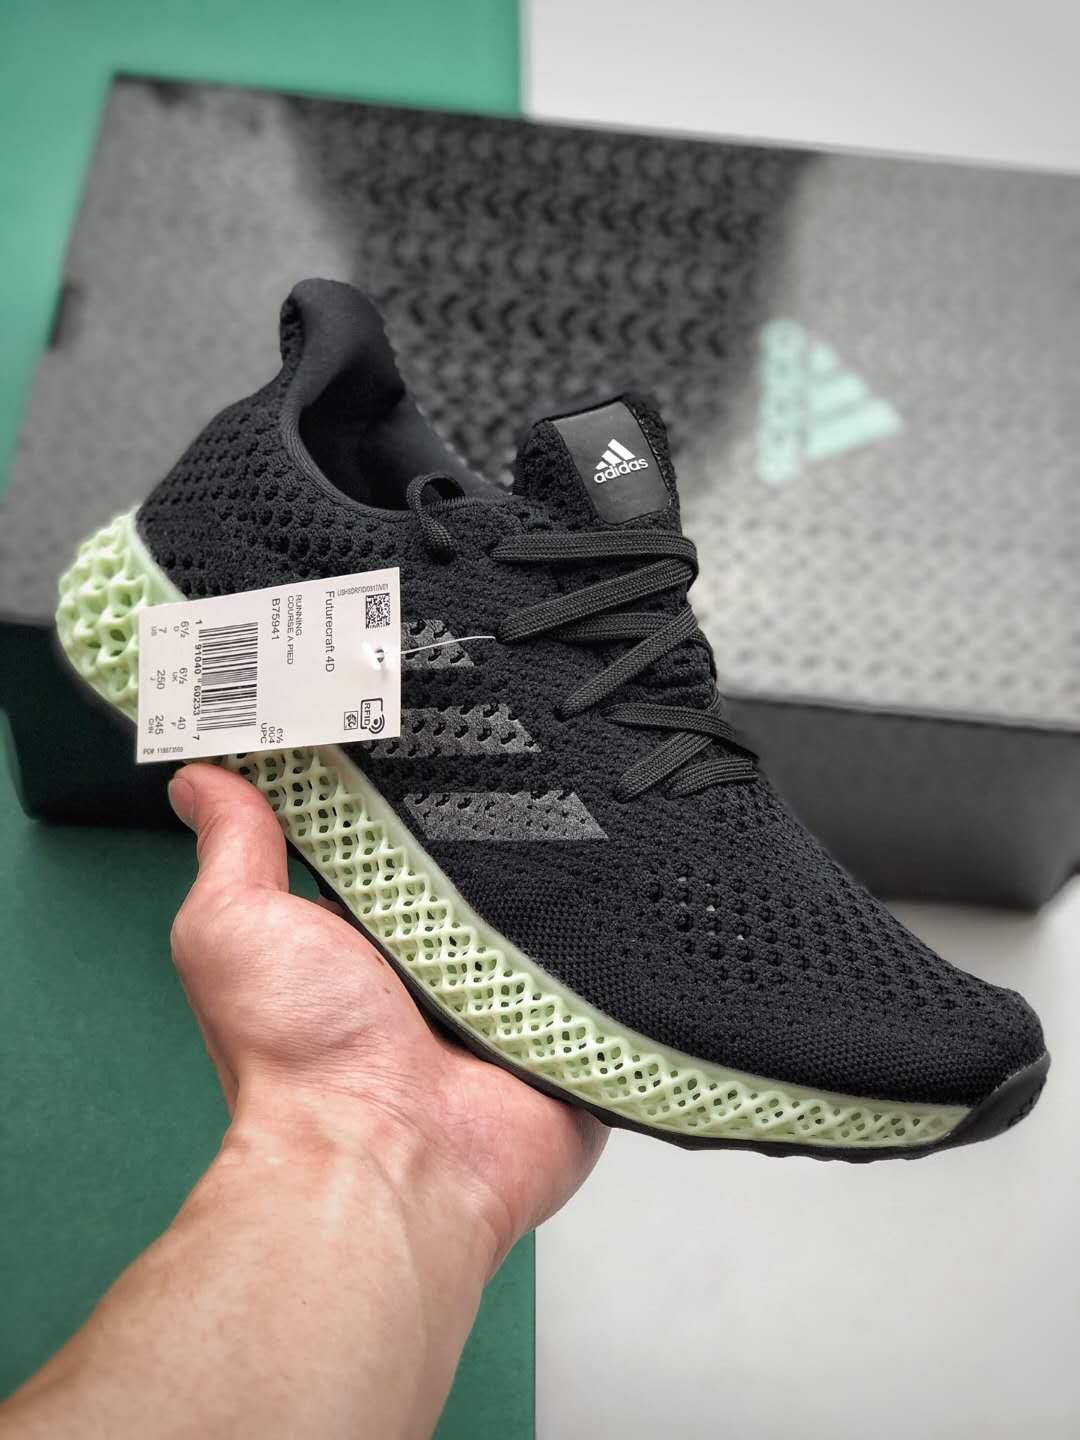 Adidas Futurecraft 4D B75942 - Innovative 3D Printed Sneakers | Limited Edition